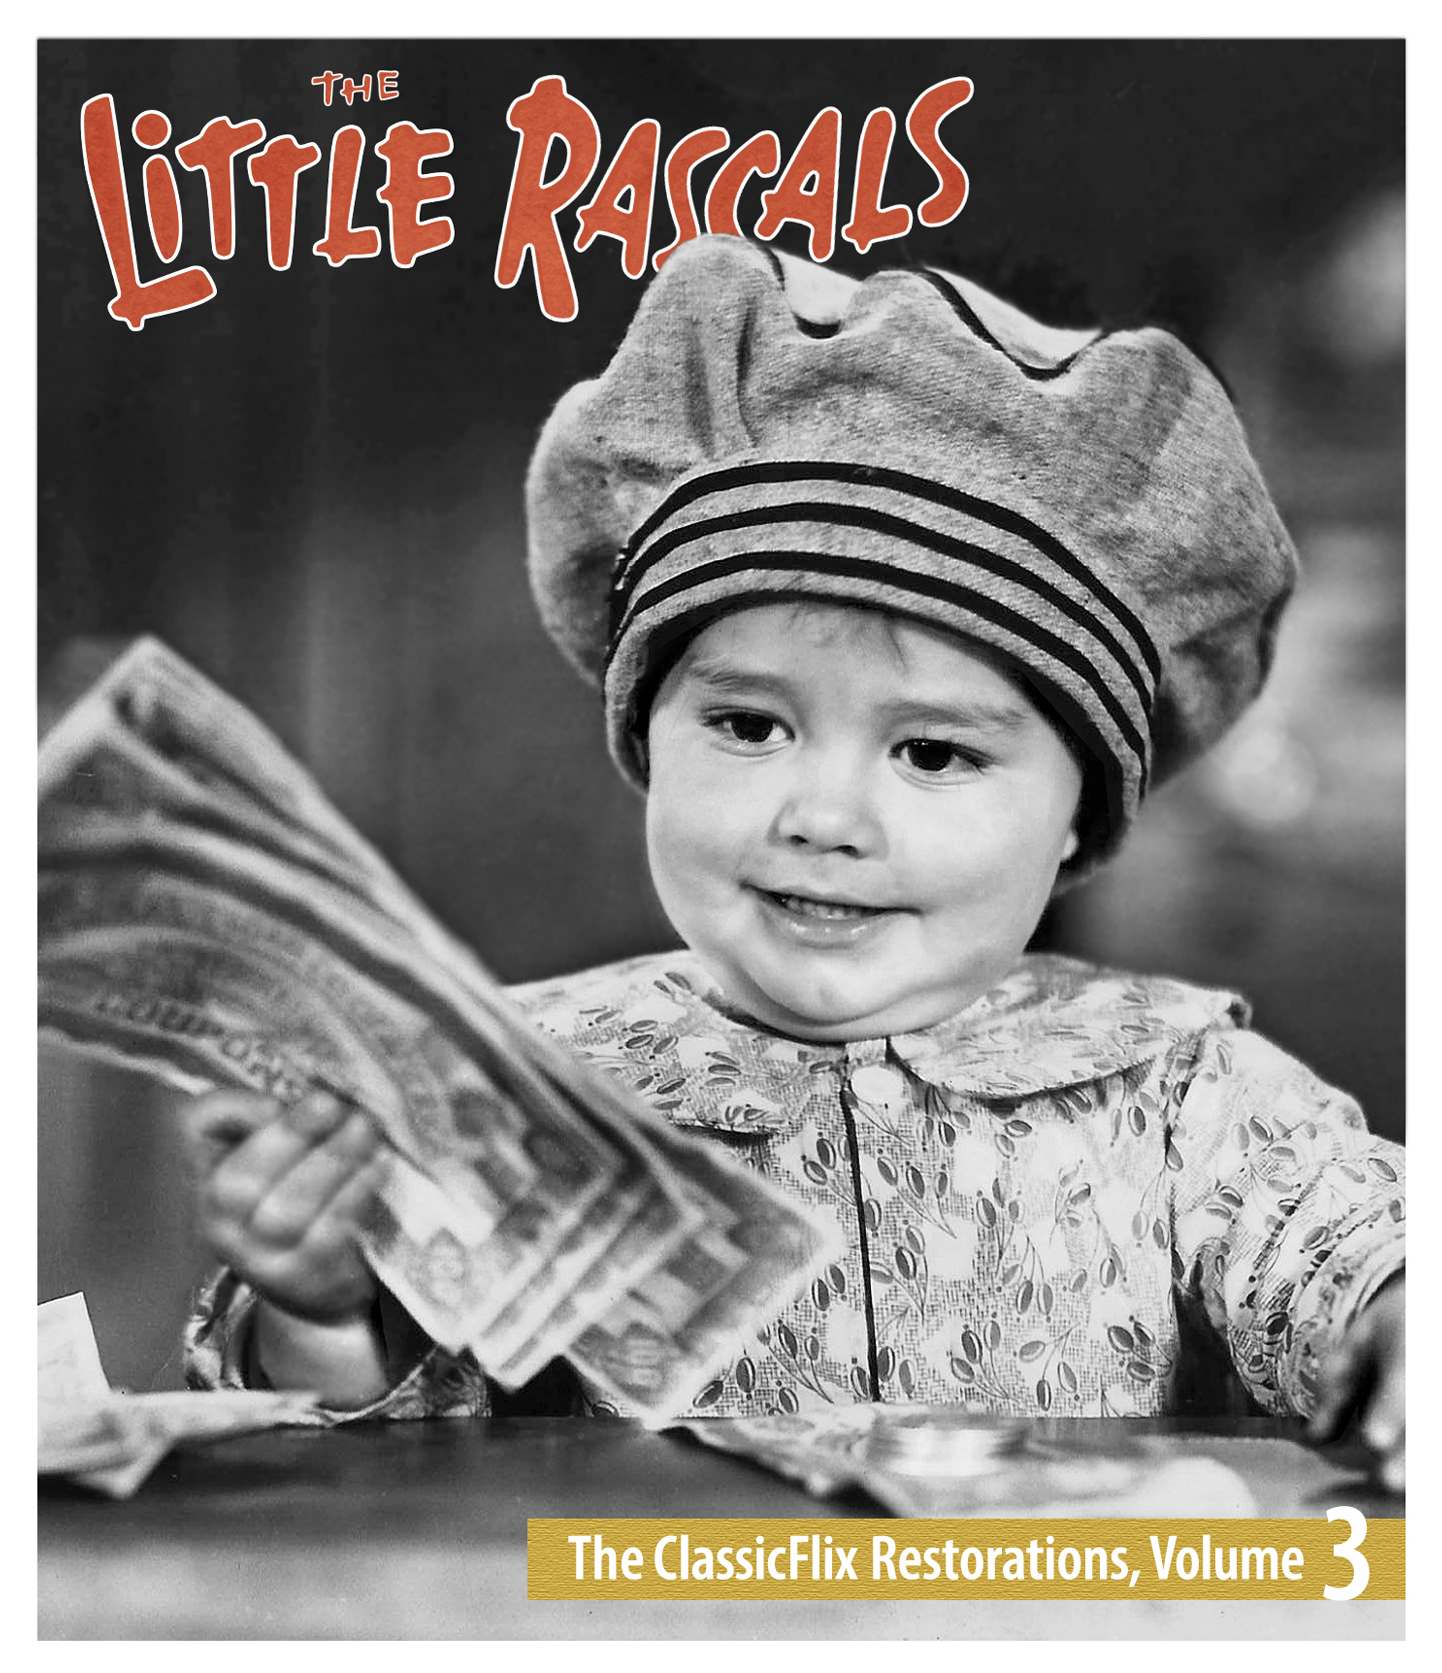 The Little Rascals - The ClassicFlix Restorations, Volume 1 (Blu-ray) -  ClassicFlix, Shop for classic movies